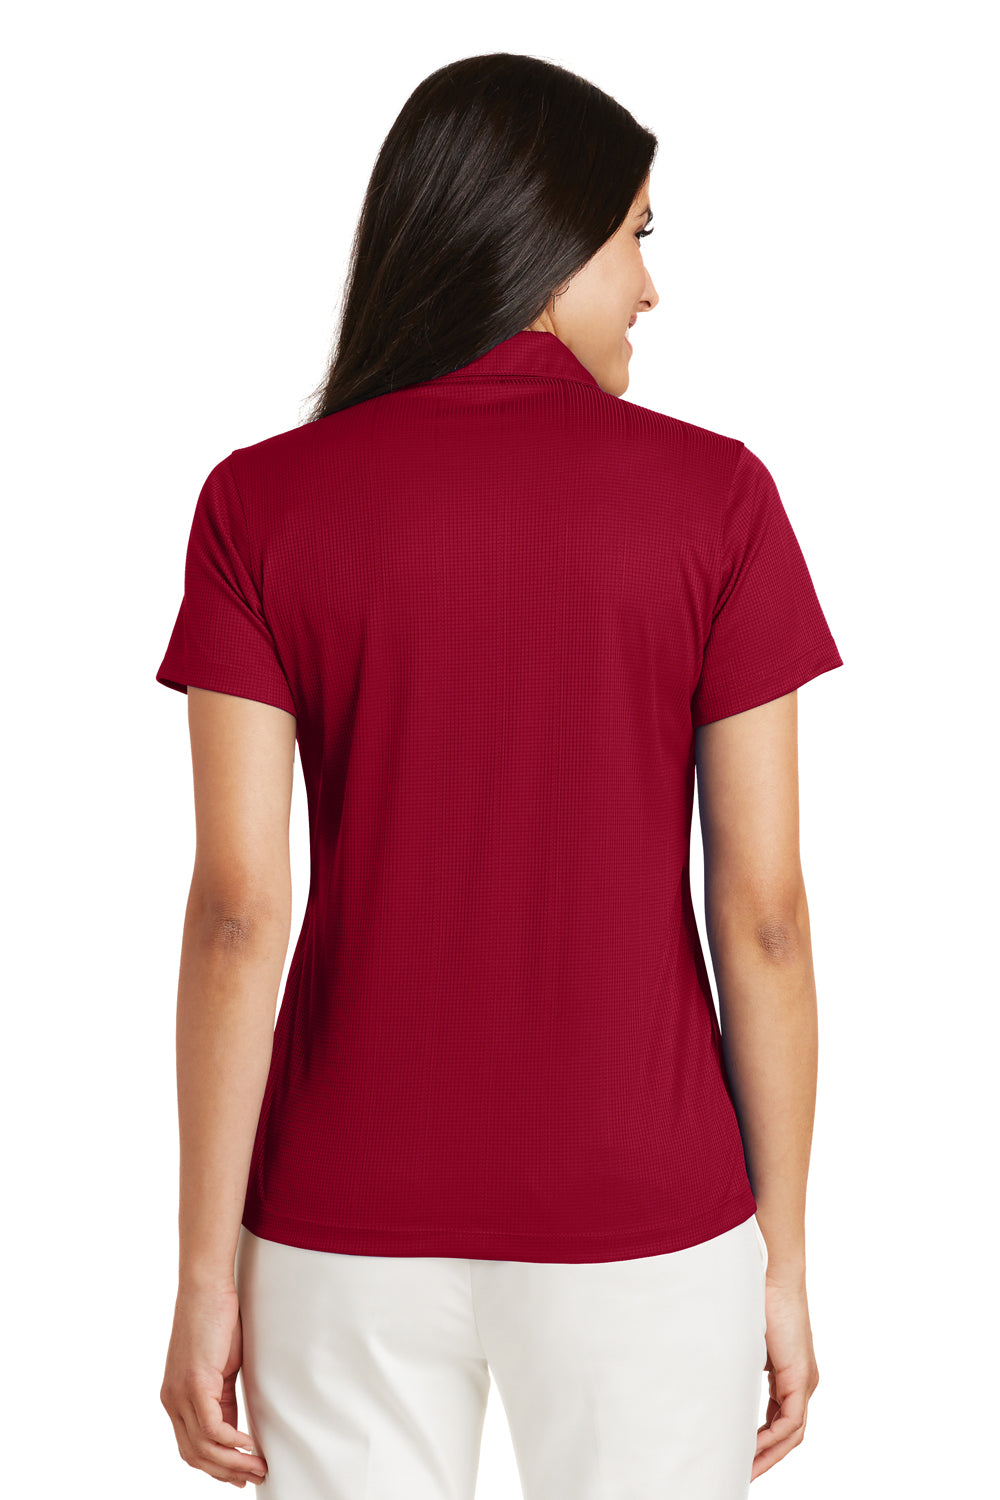 Port Authority L528 Womens Performance Moisture Wicking Short Sleeve Polo Shirt Red Back